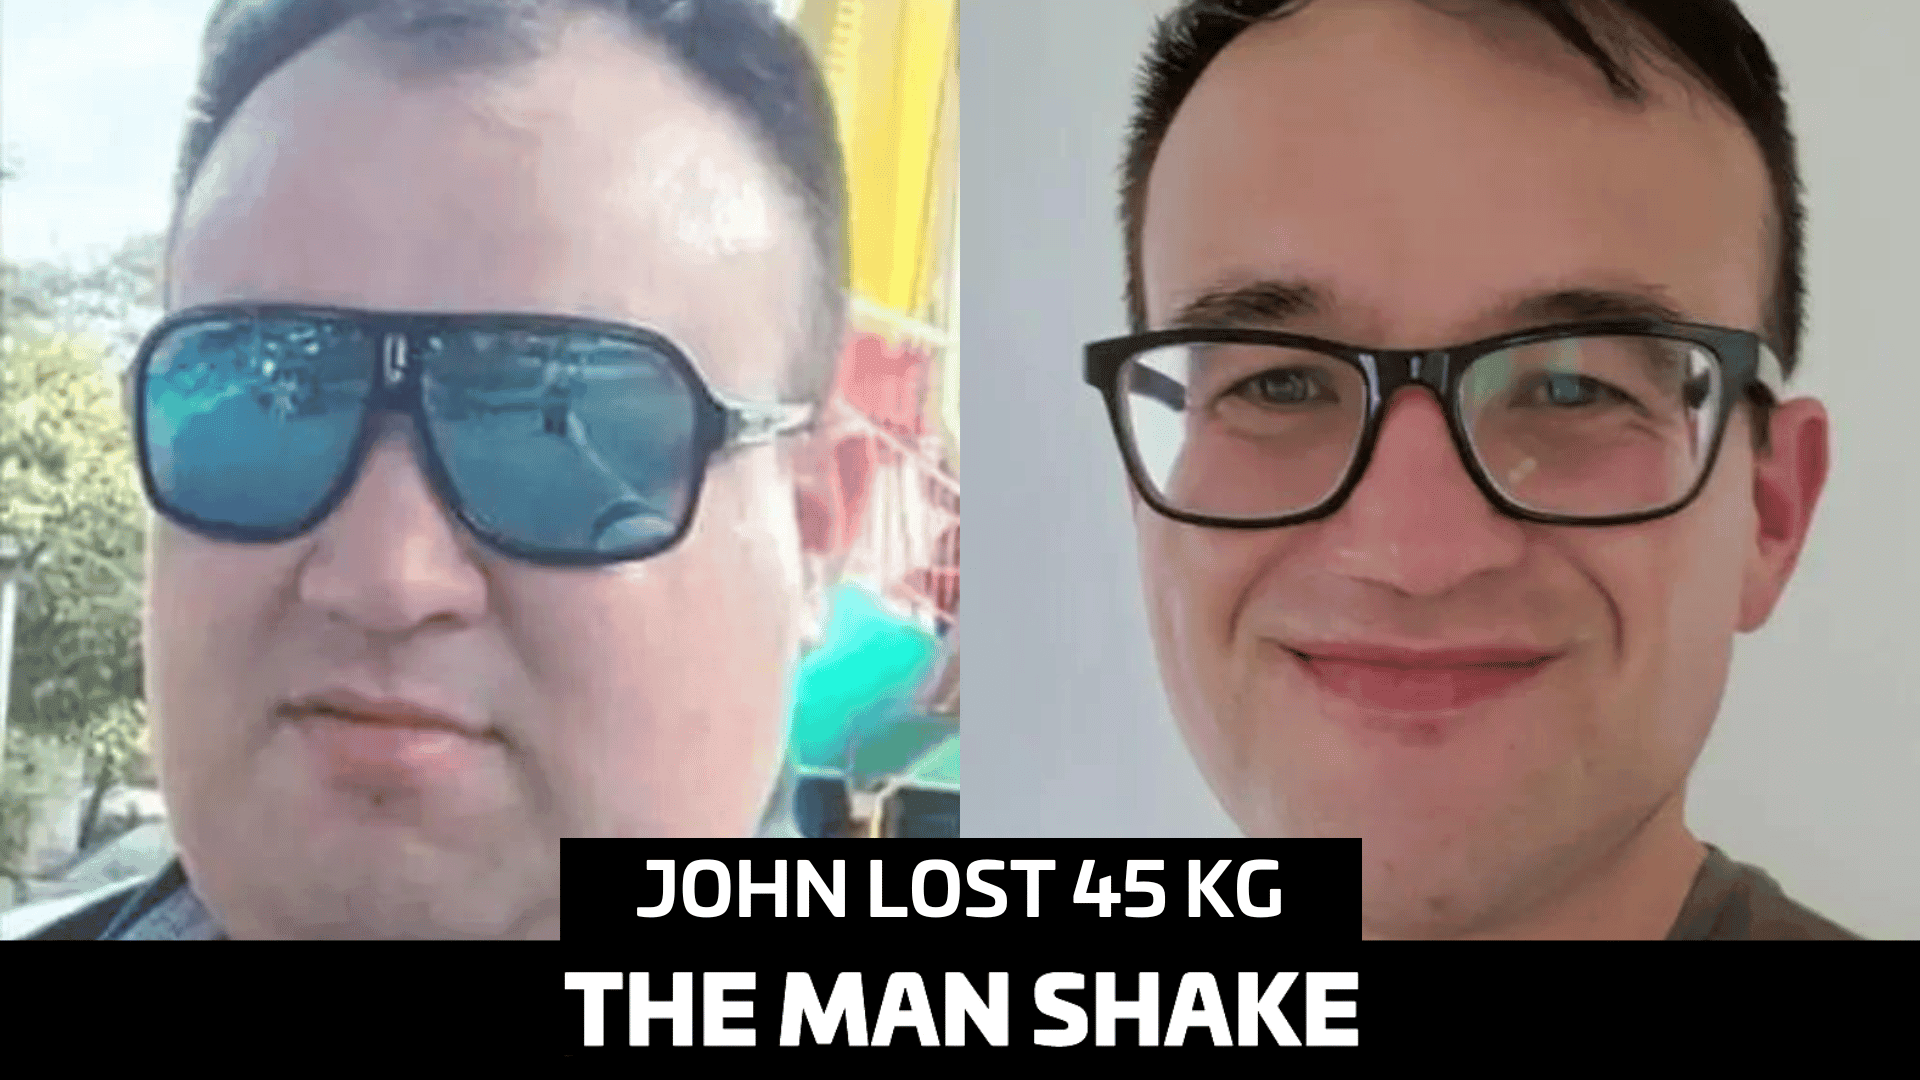 John lost 45kg after an emergency visit to the hospital